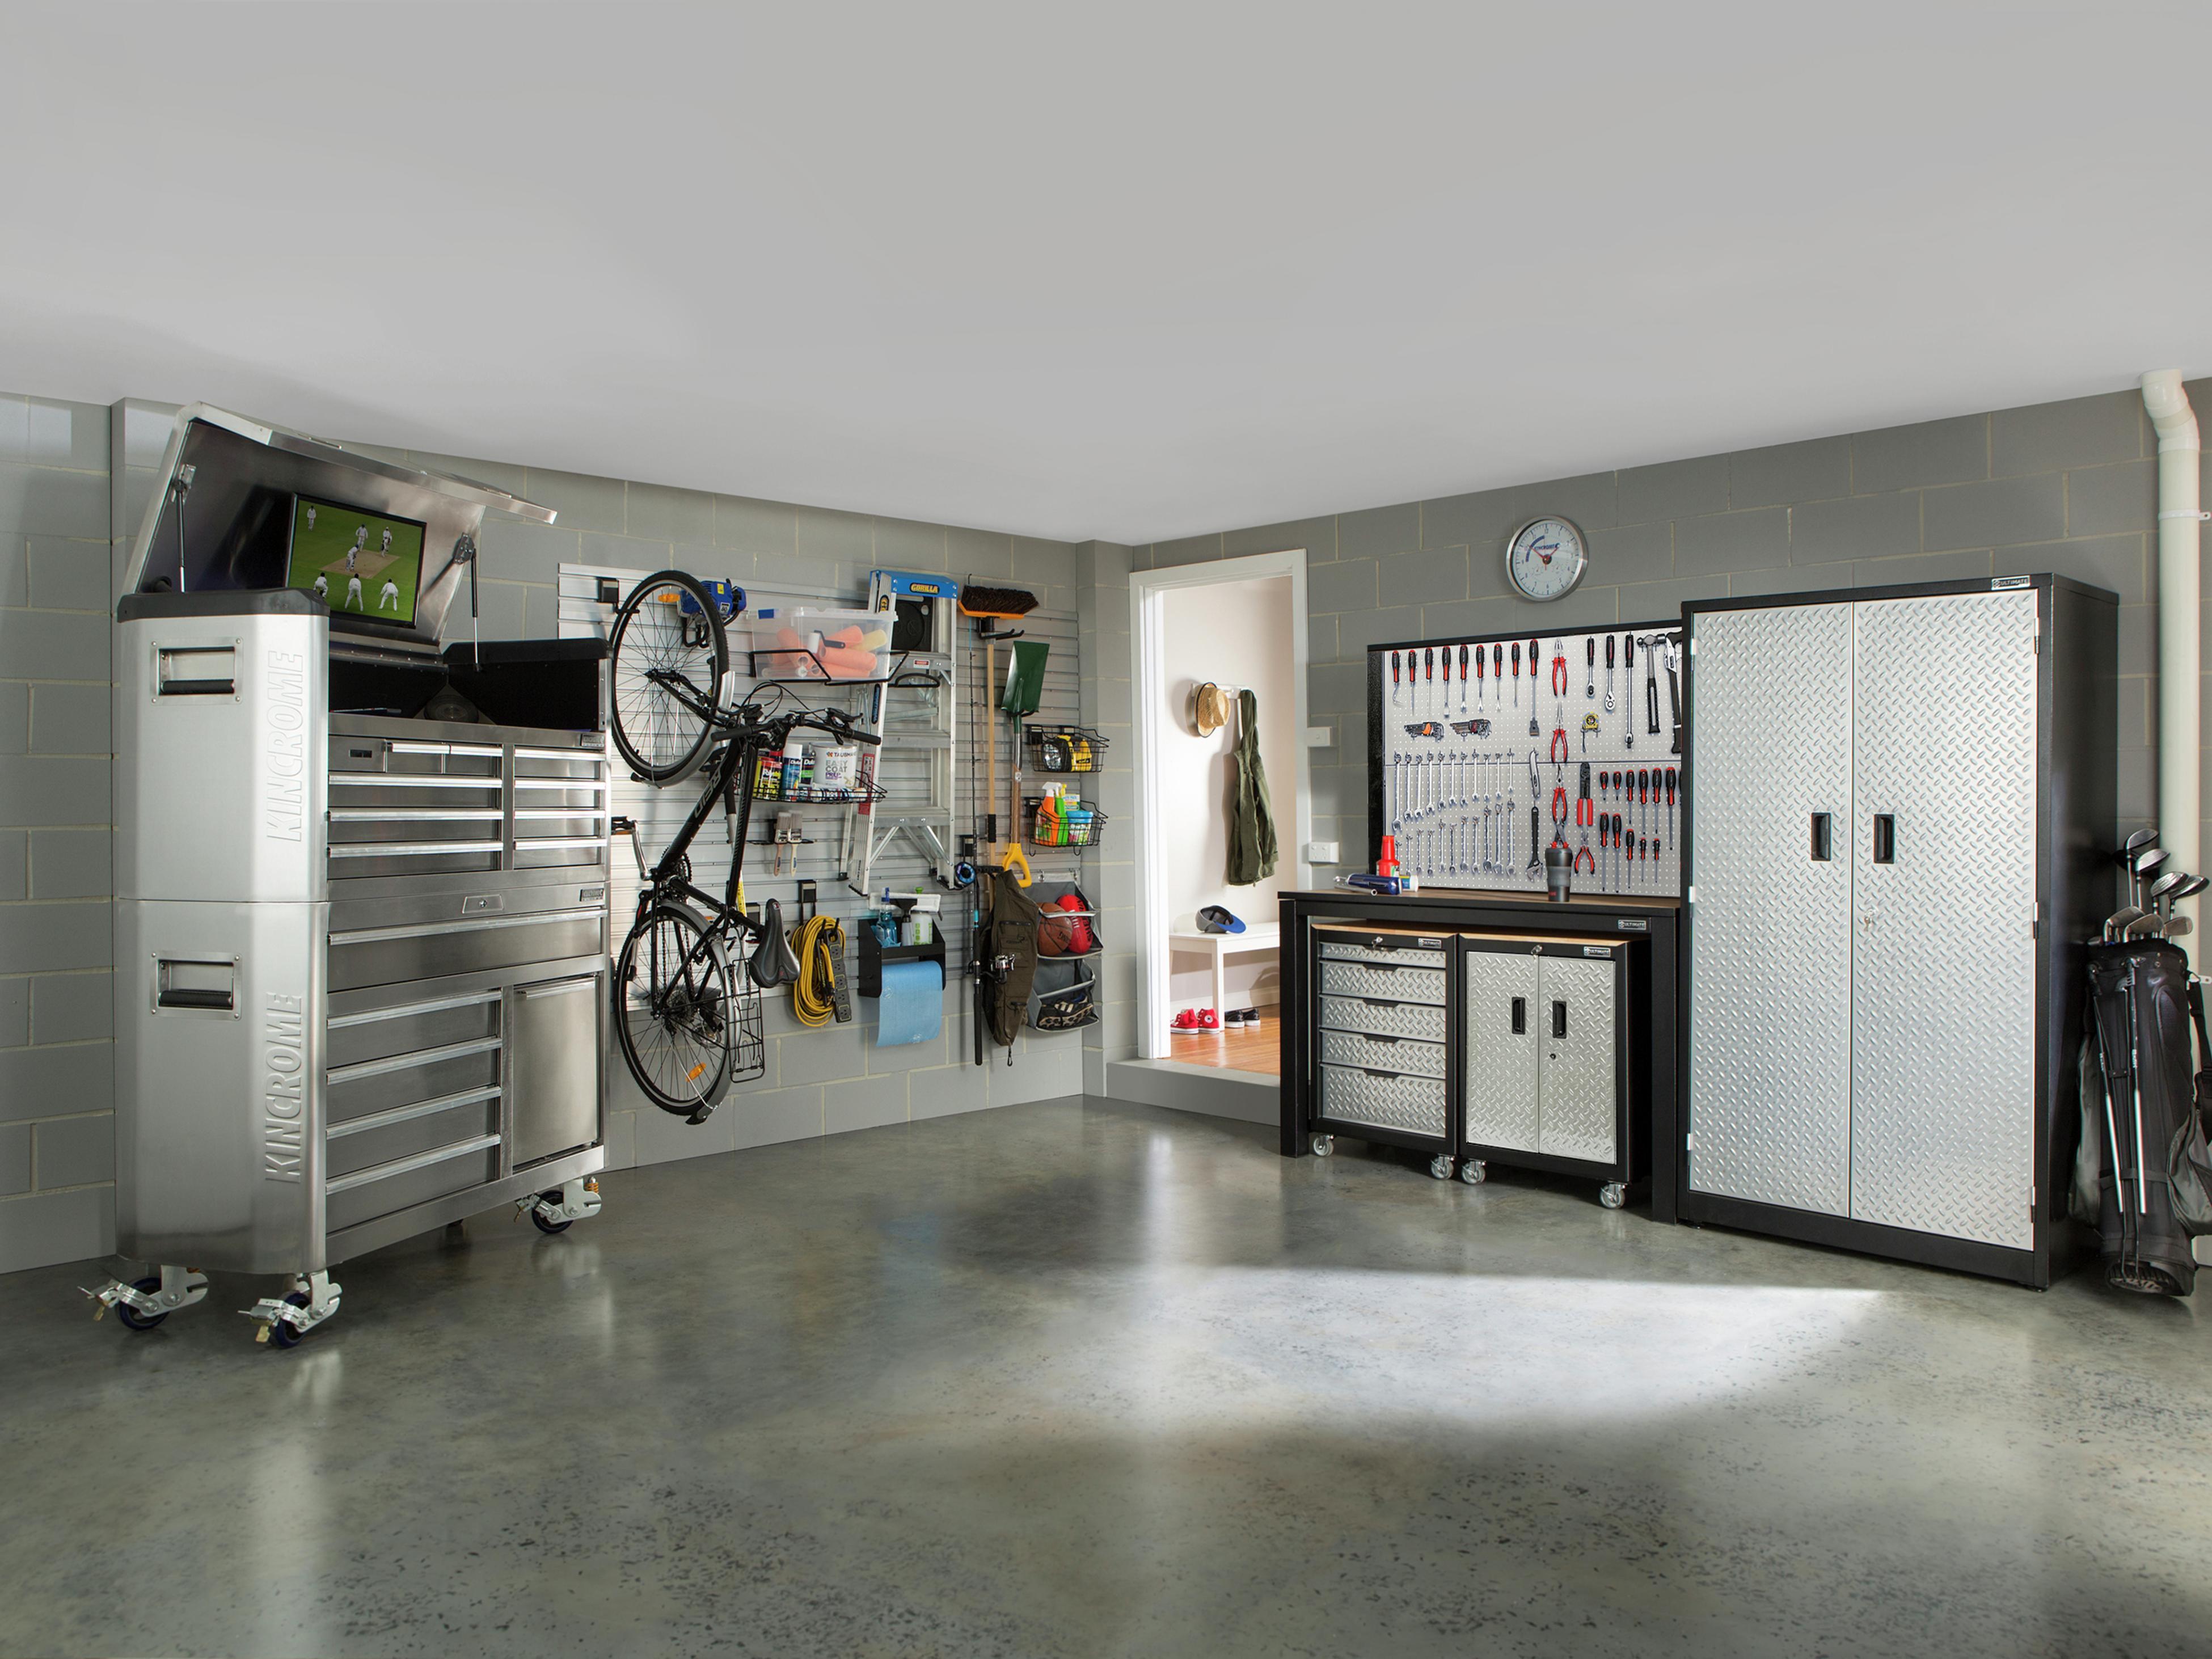 4 Simple Steps to Organize Your Garage